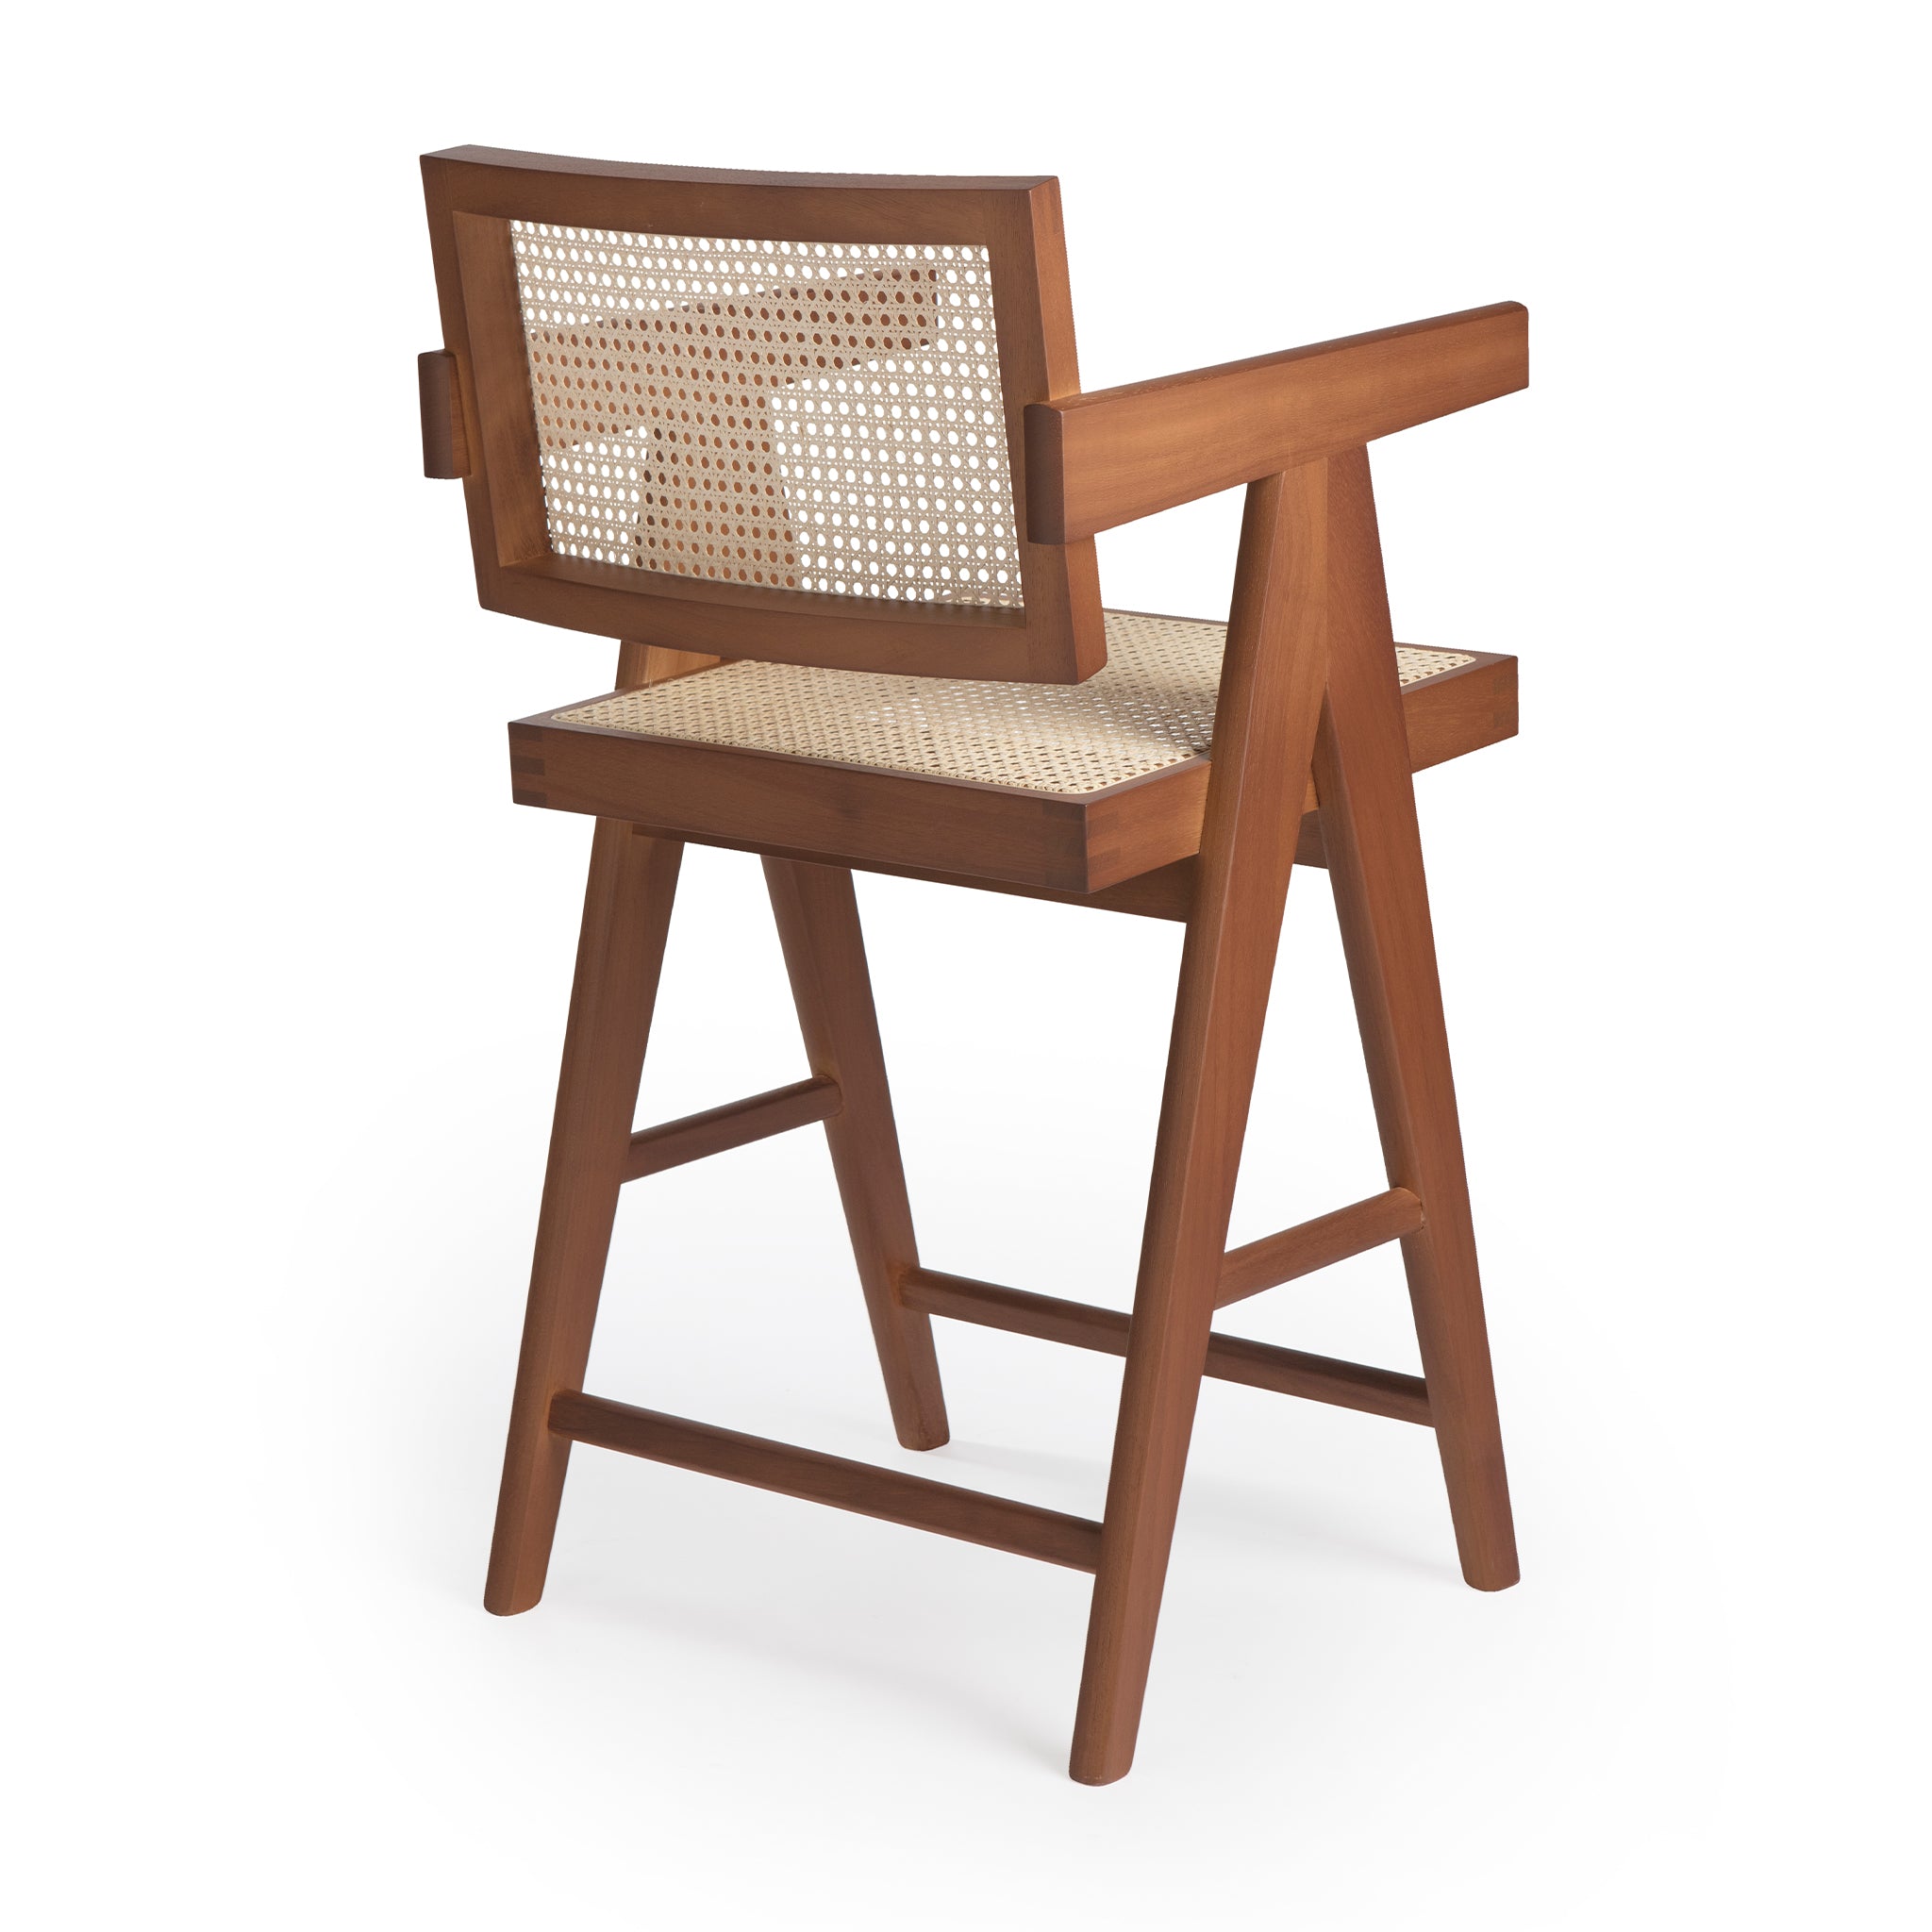 Back view of an authentic chandigarh armed counter stool, pierre jeanneret era, teak frame, viennese cane, produced by Klarel #K37-1